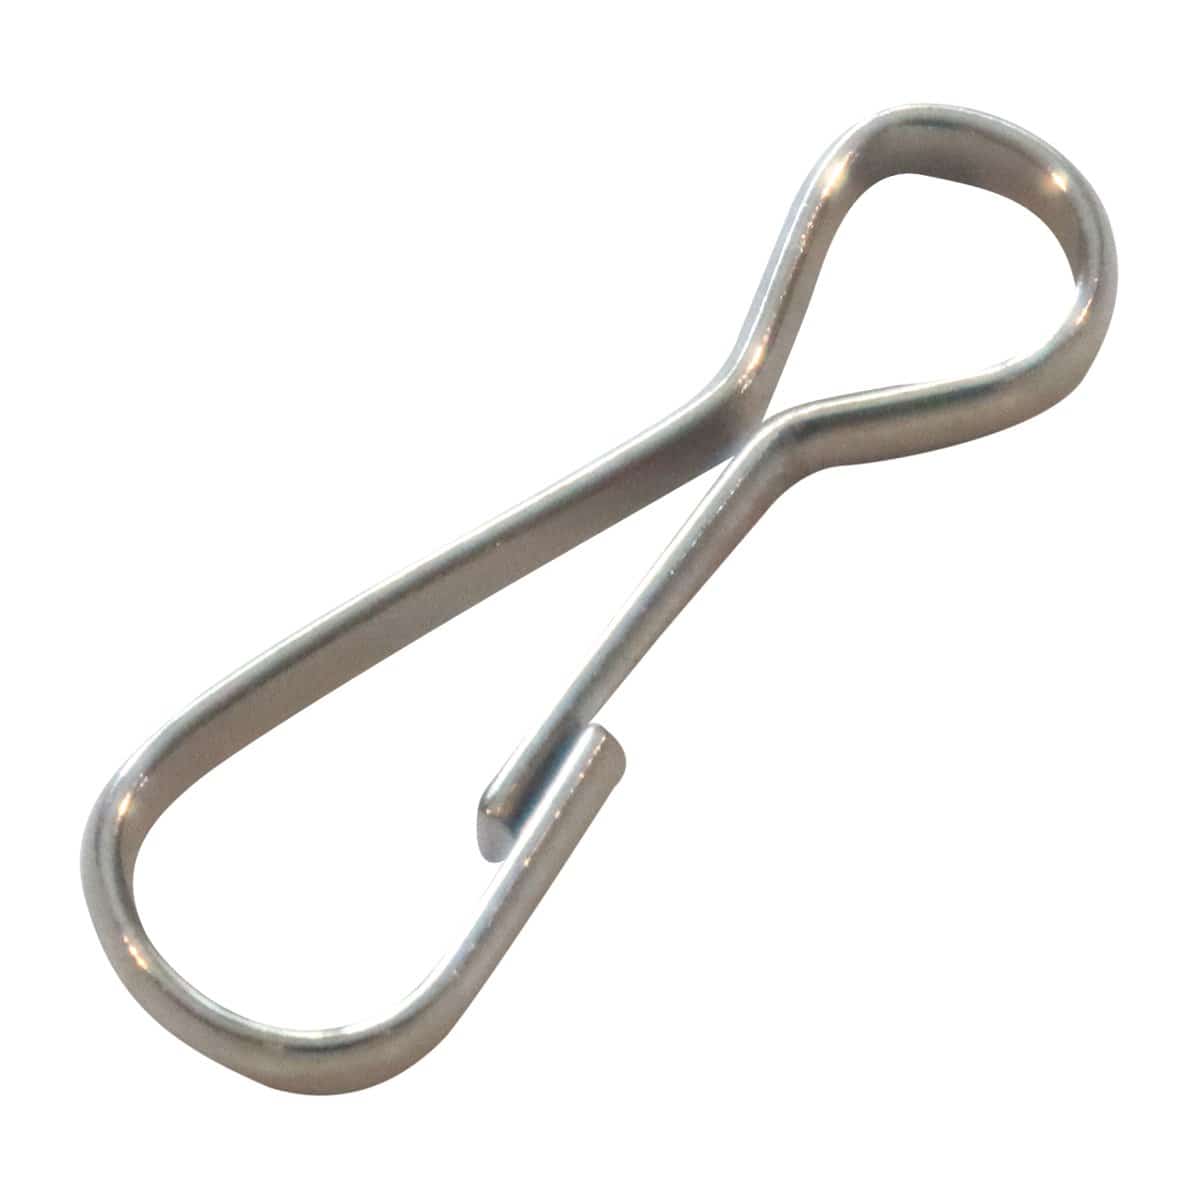 Small Metal J Hook Spring Clips - 1 1/4" for DIY Lanyards & Keychains (6920-2350) 6920-2350